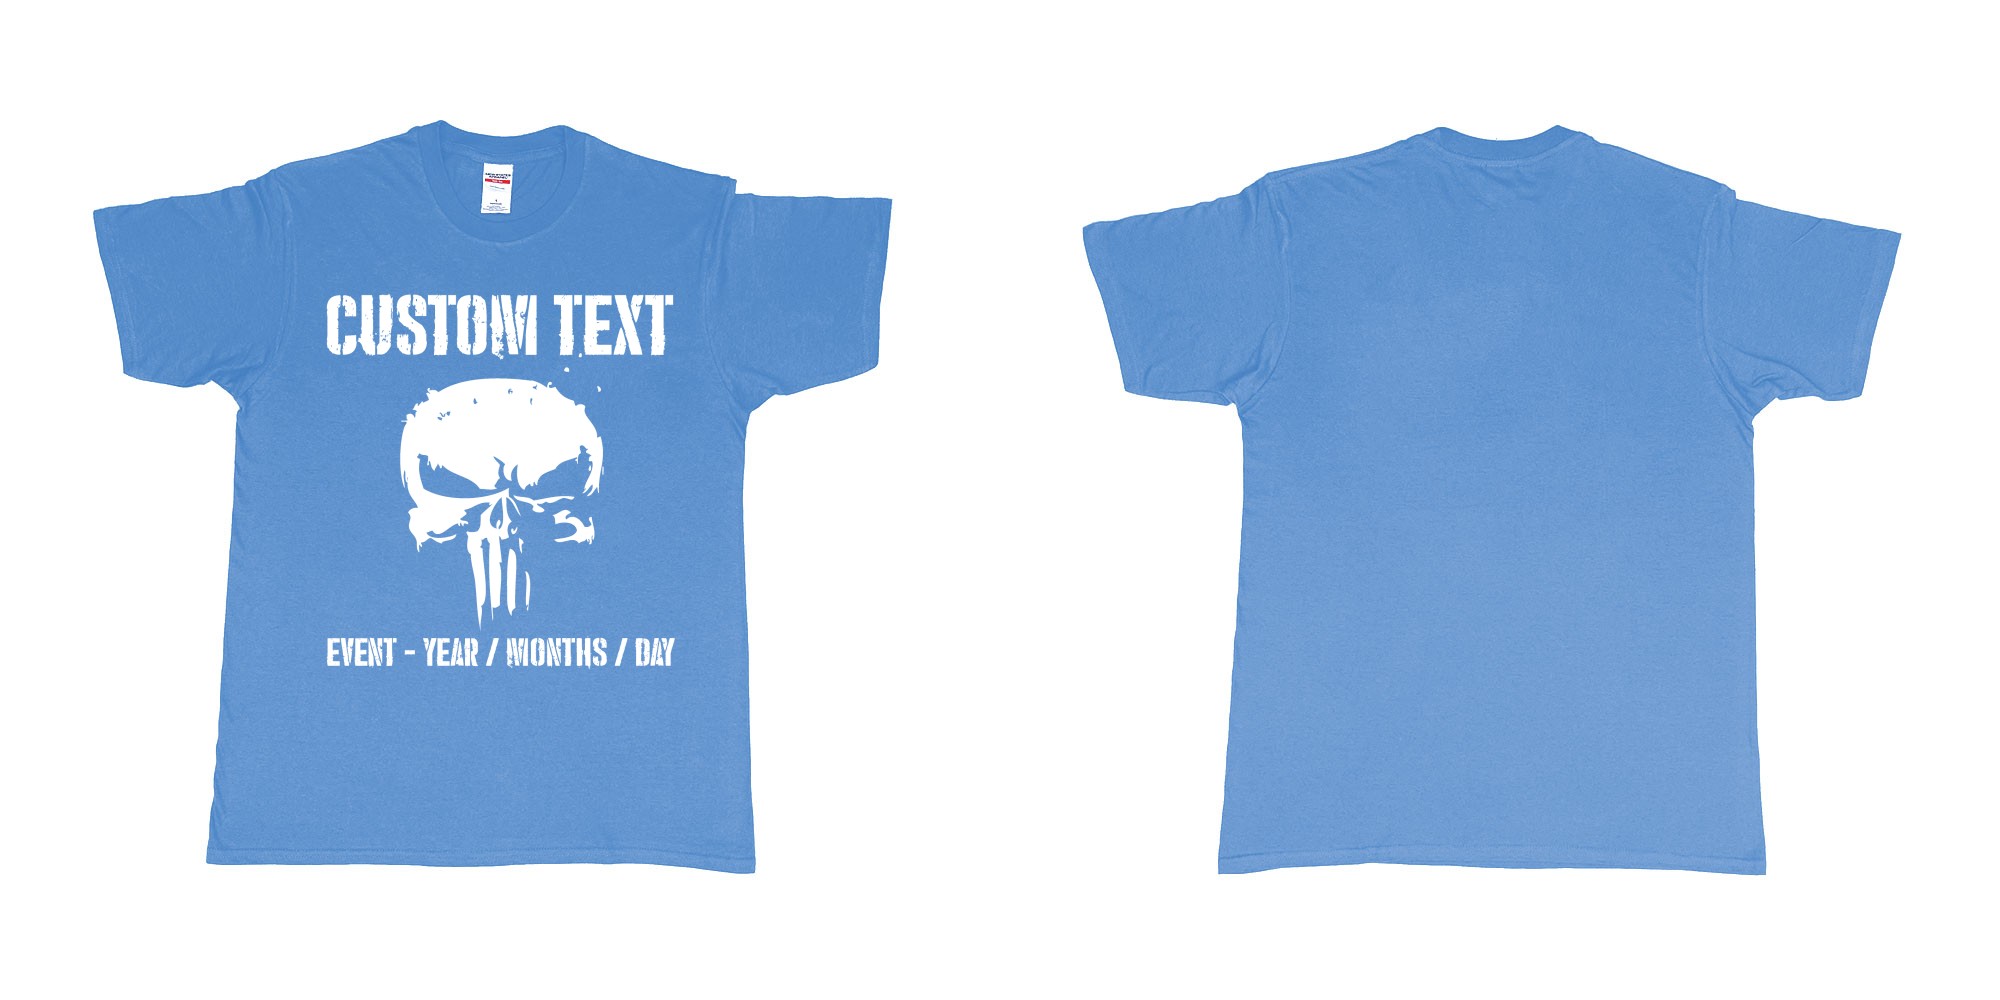 Custom tshirt design the punisher scull logo custom text in fabric color carolina-blue choice your own text made in Bali by The Pirate Way